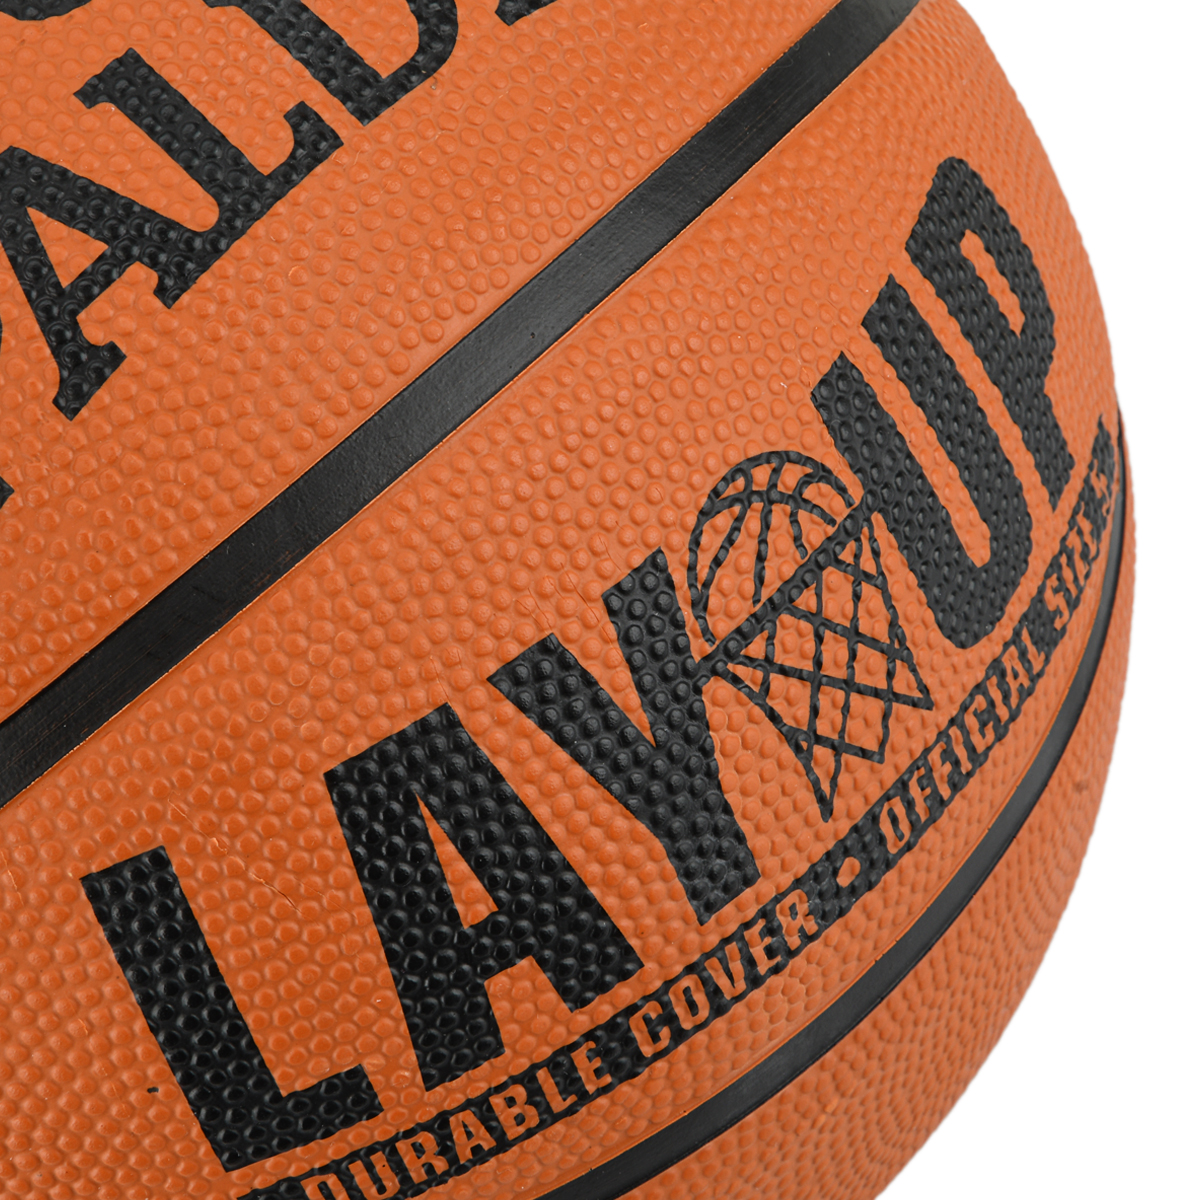 Pelota Spalding Lay Up,  image number null